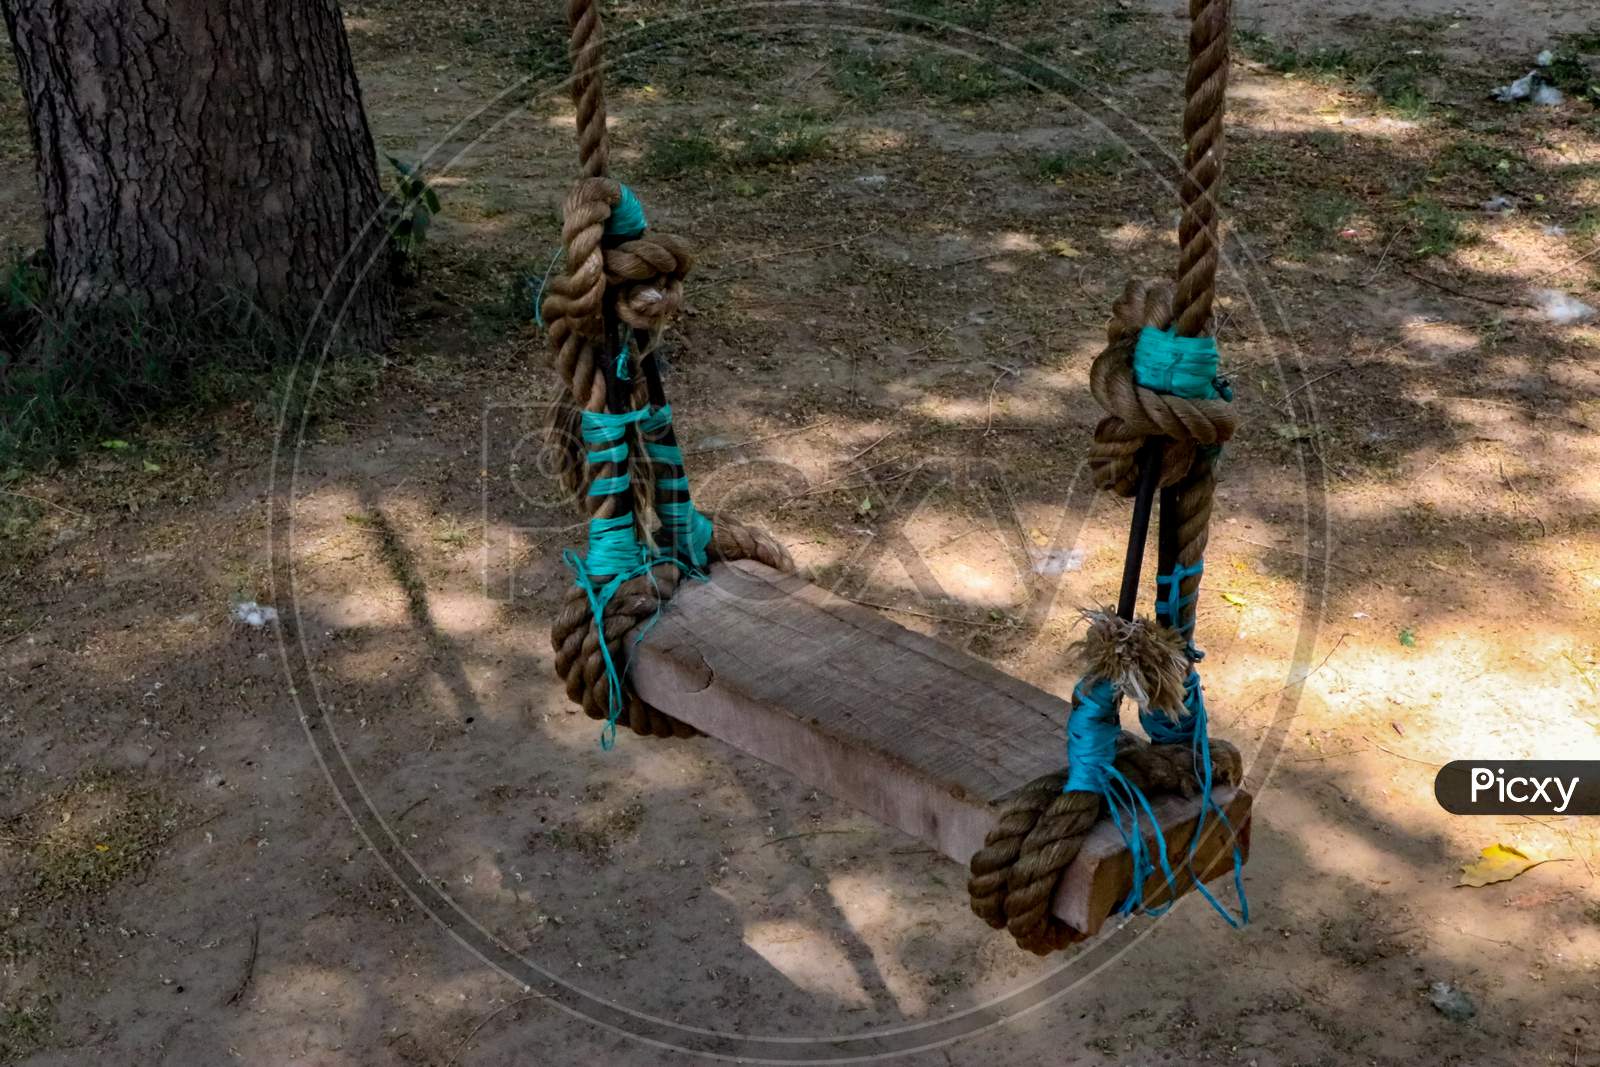 A wooden swing in the park.